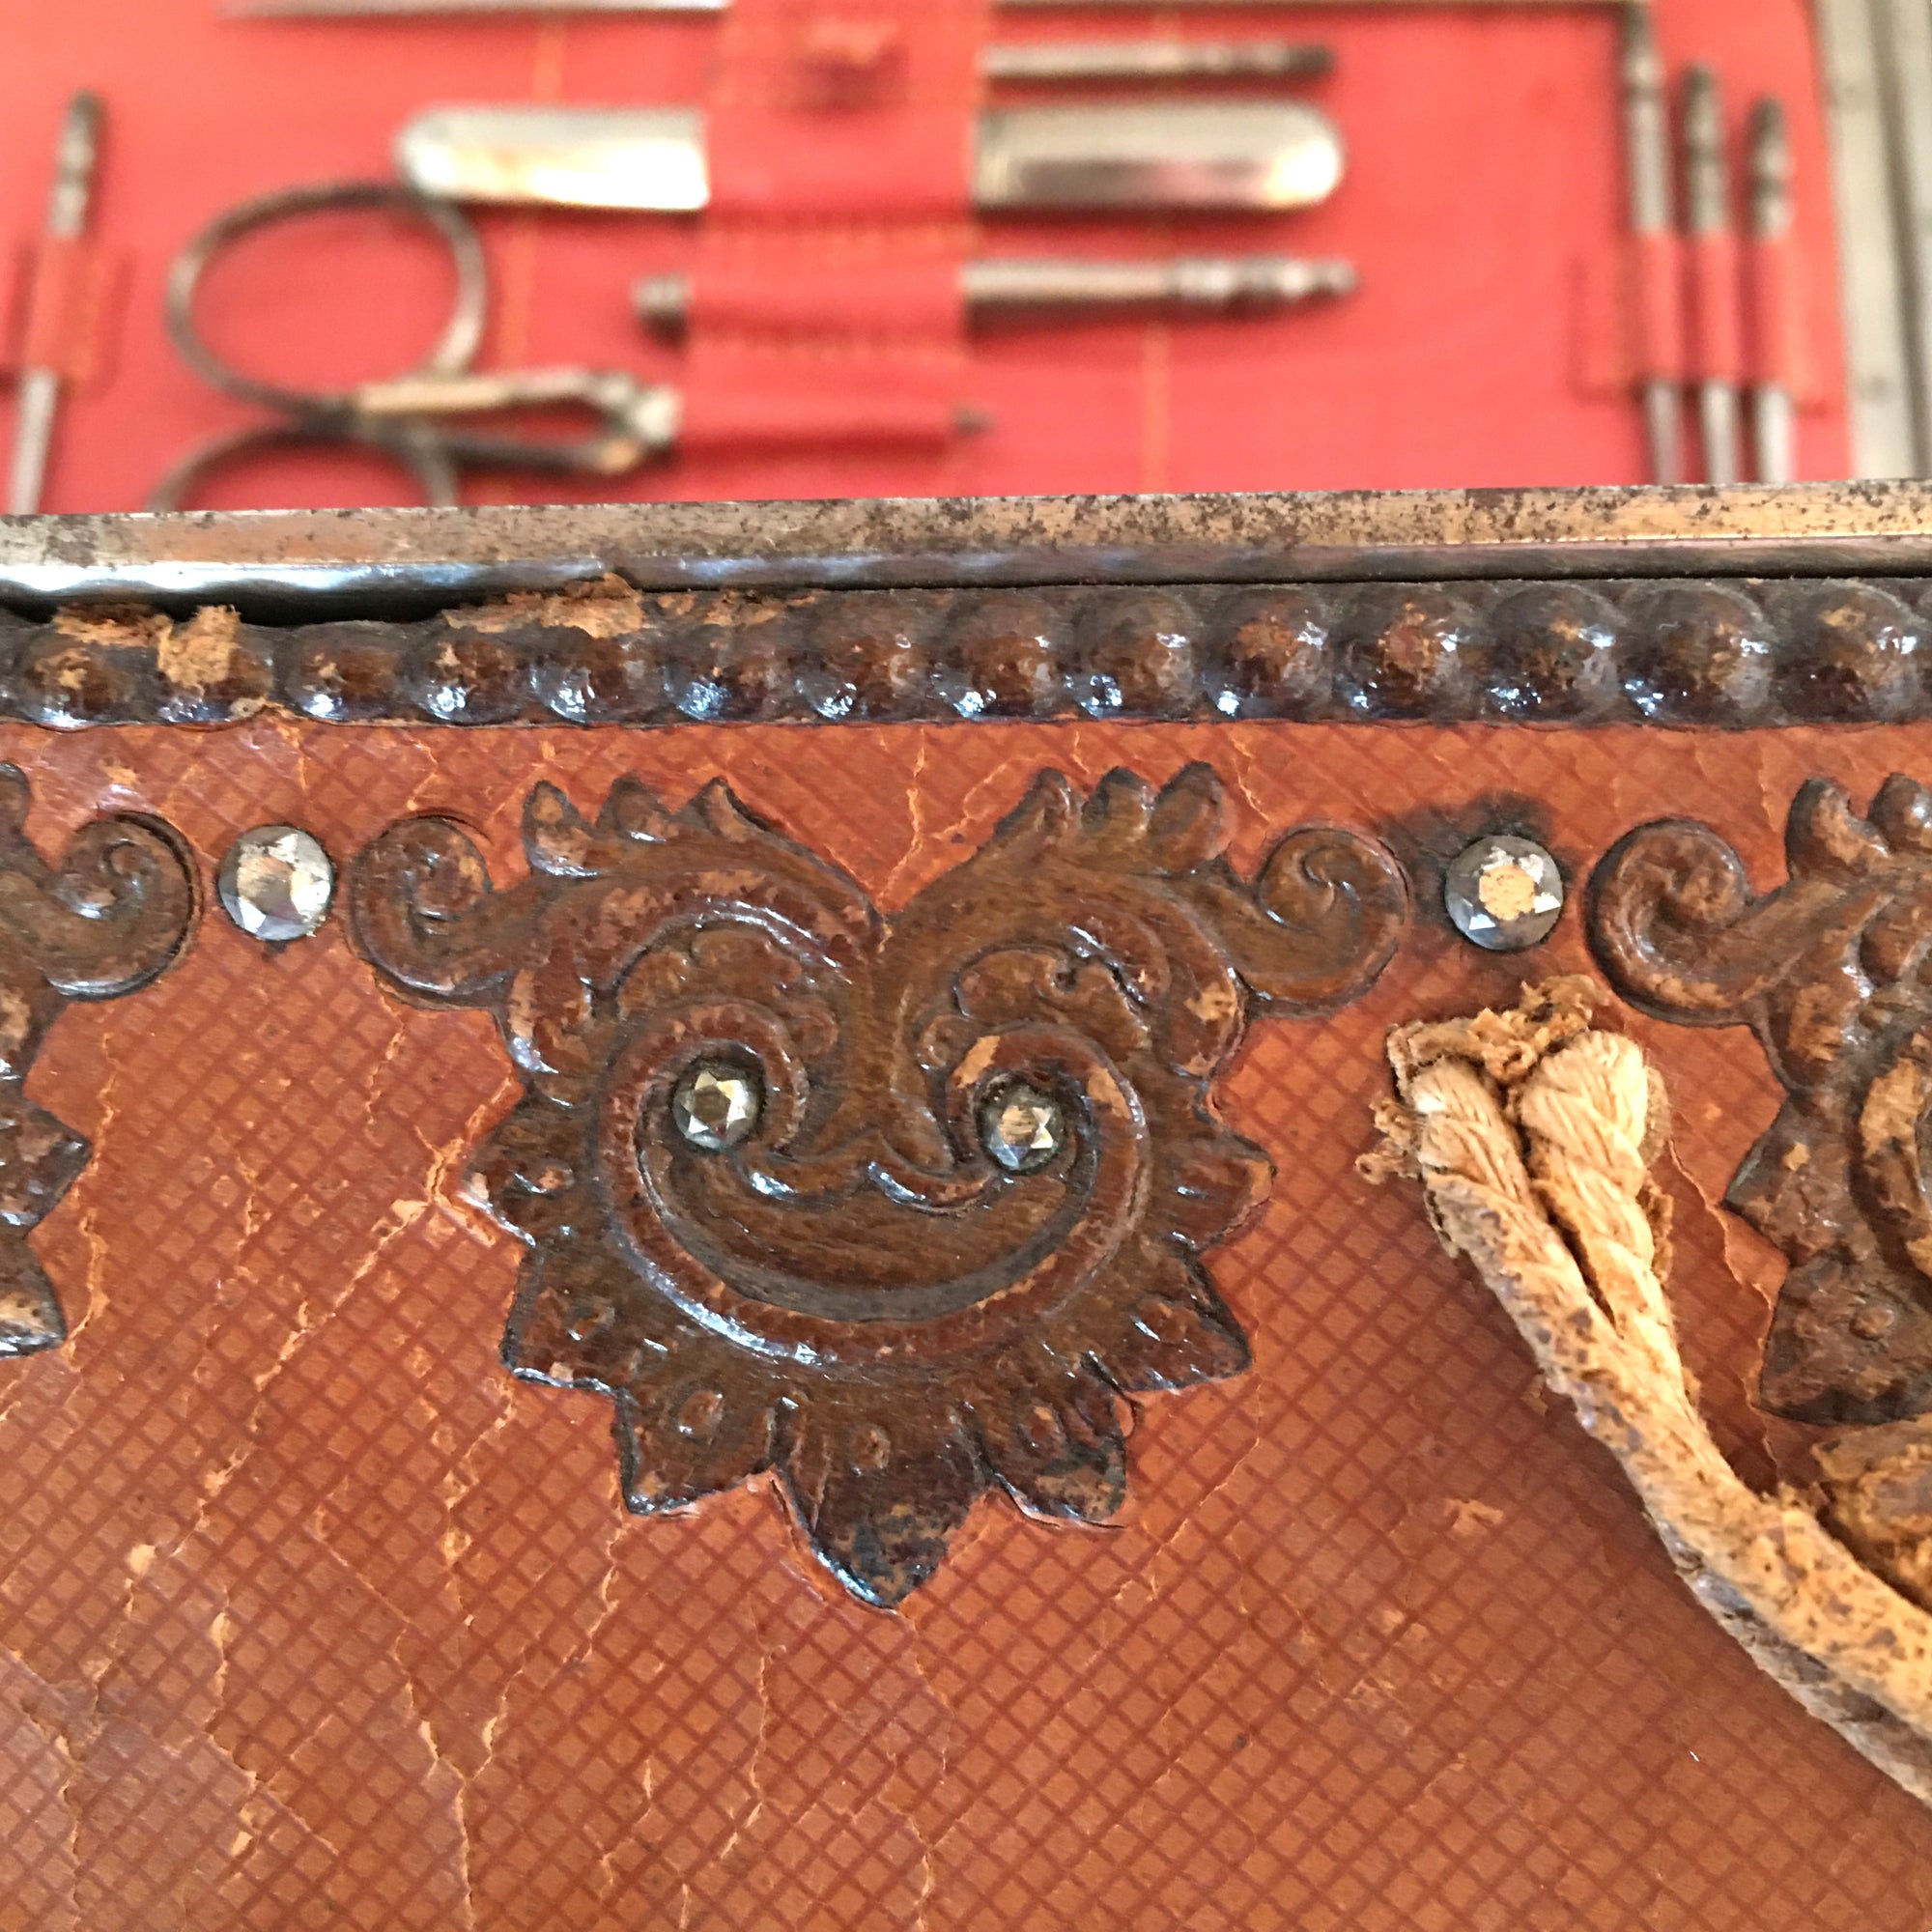 Early 1900s Tooled Leather “Brevette” Sewing Kit for Travel